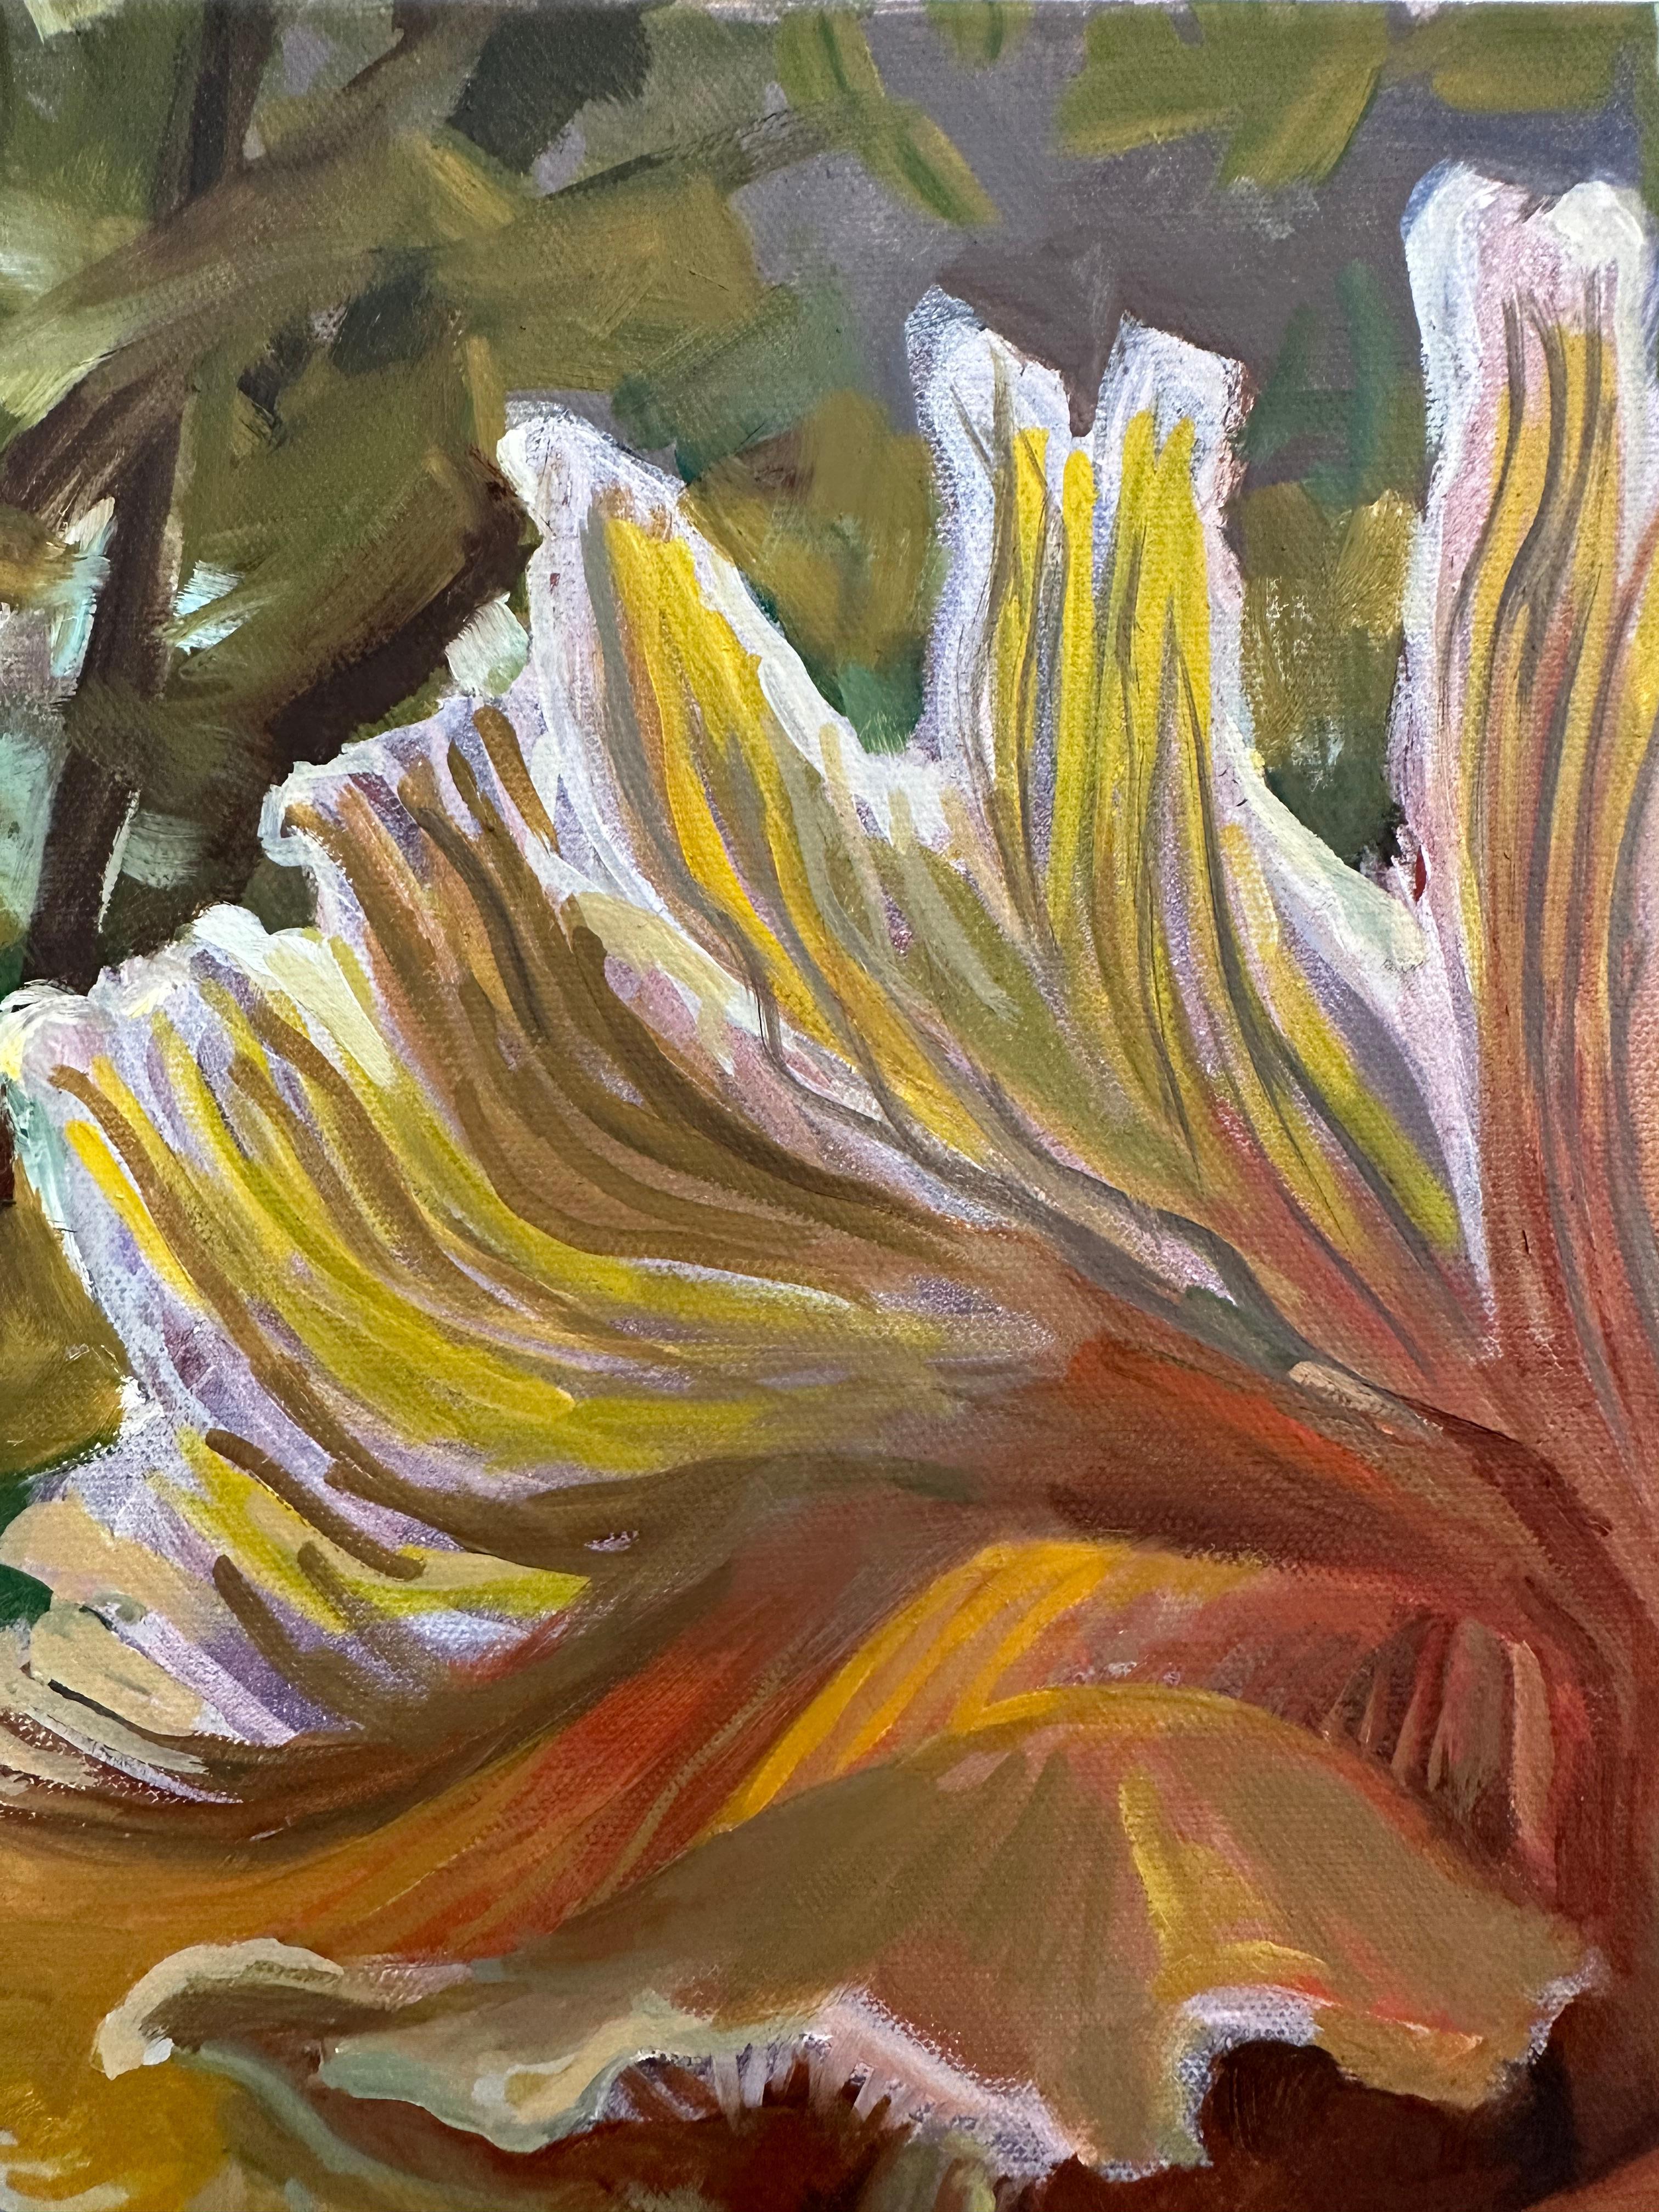 A golden oyster mushroom in hues of yellow, orange, and peach is masterfully painted, arranged in a dynamic, asymmetrical composition, luminous against an earthy brown and moss green background with hints of rich cobalt blue beneath the mushroom.